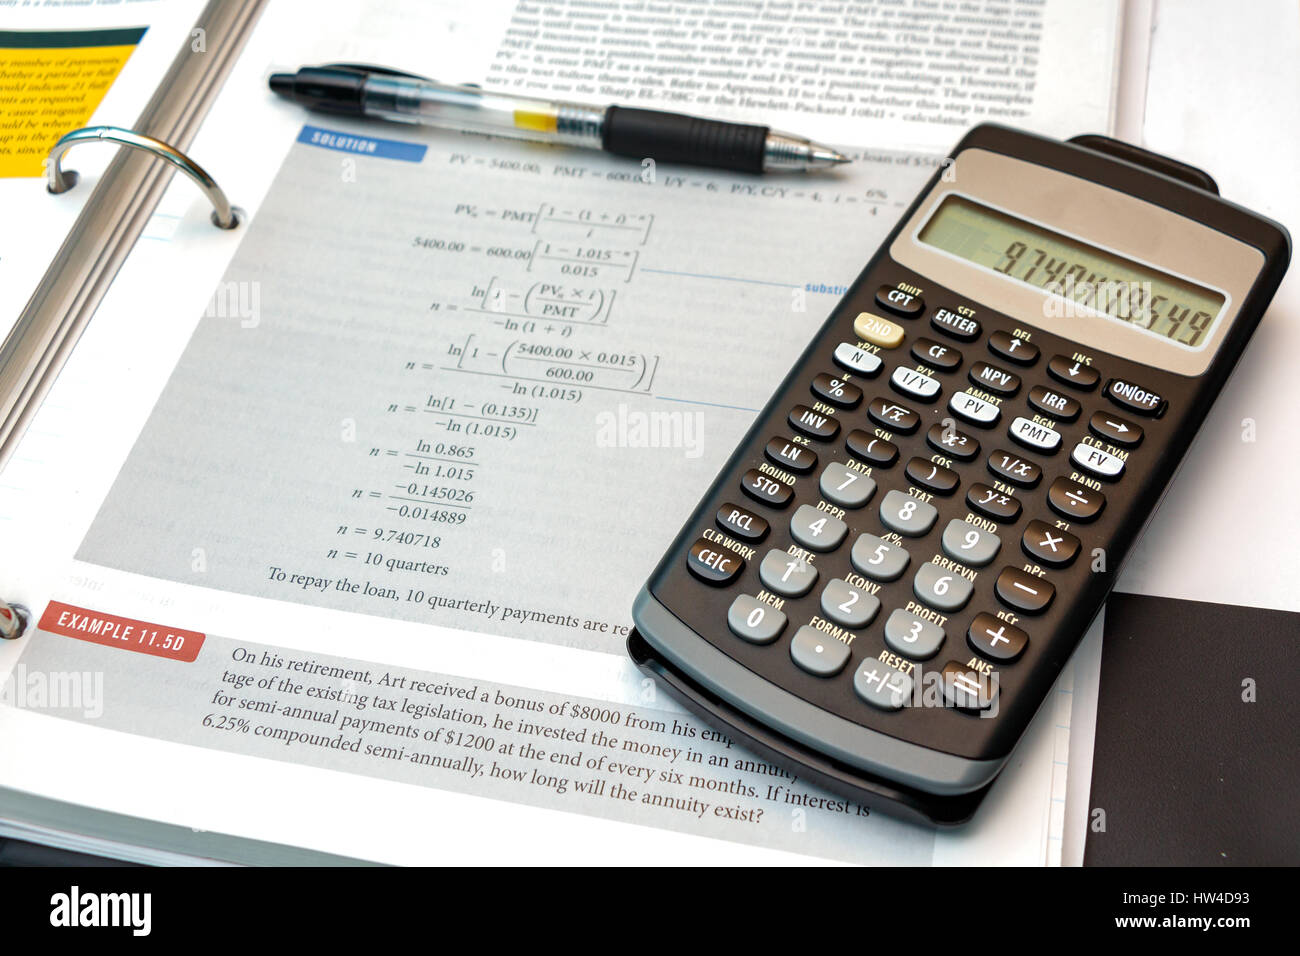 Calculator, pen and text book, illustrating a math problem Stock Photo -  Alamy